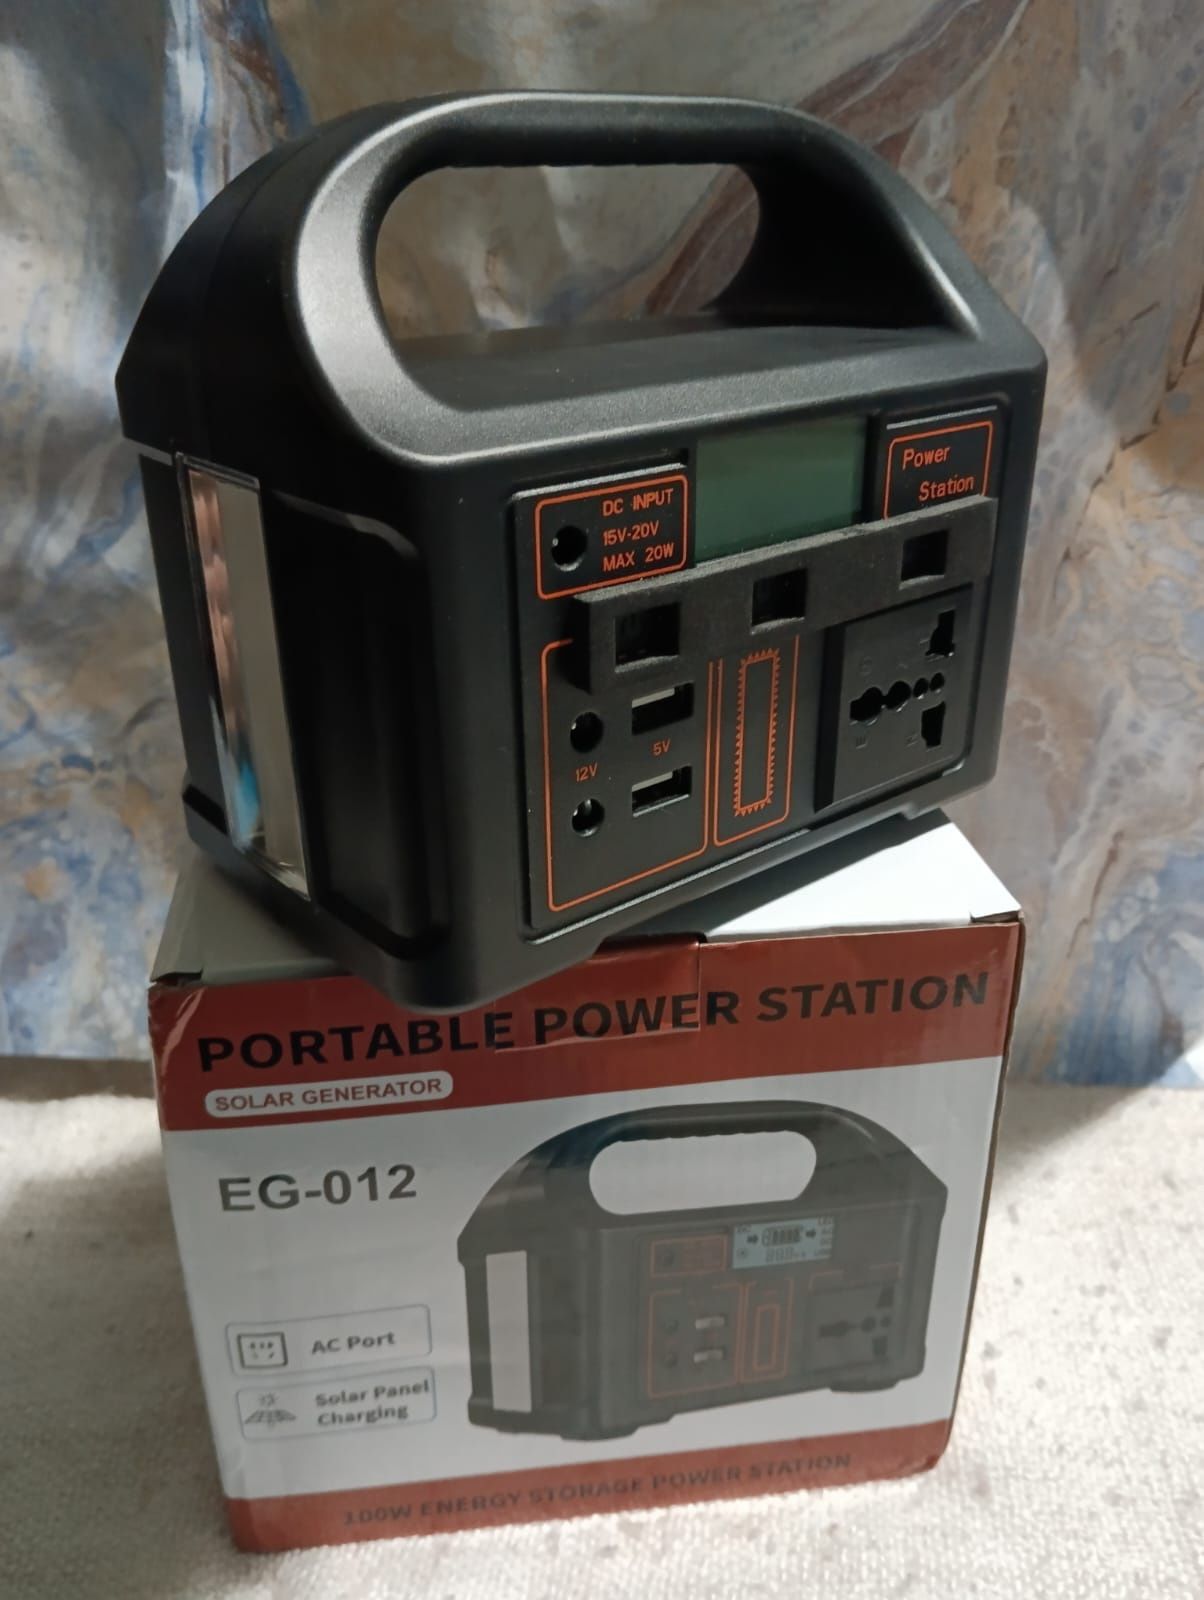 Portable power station 100w 24000mAh 76.8Wh